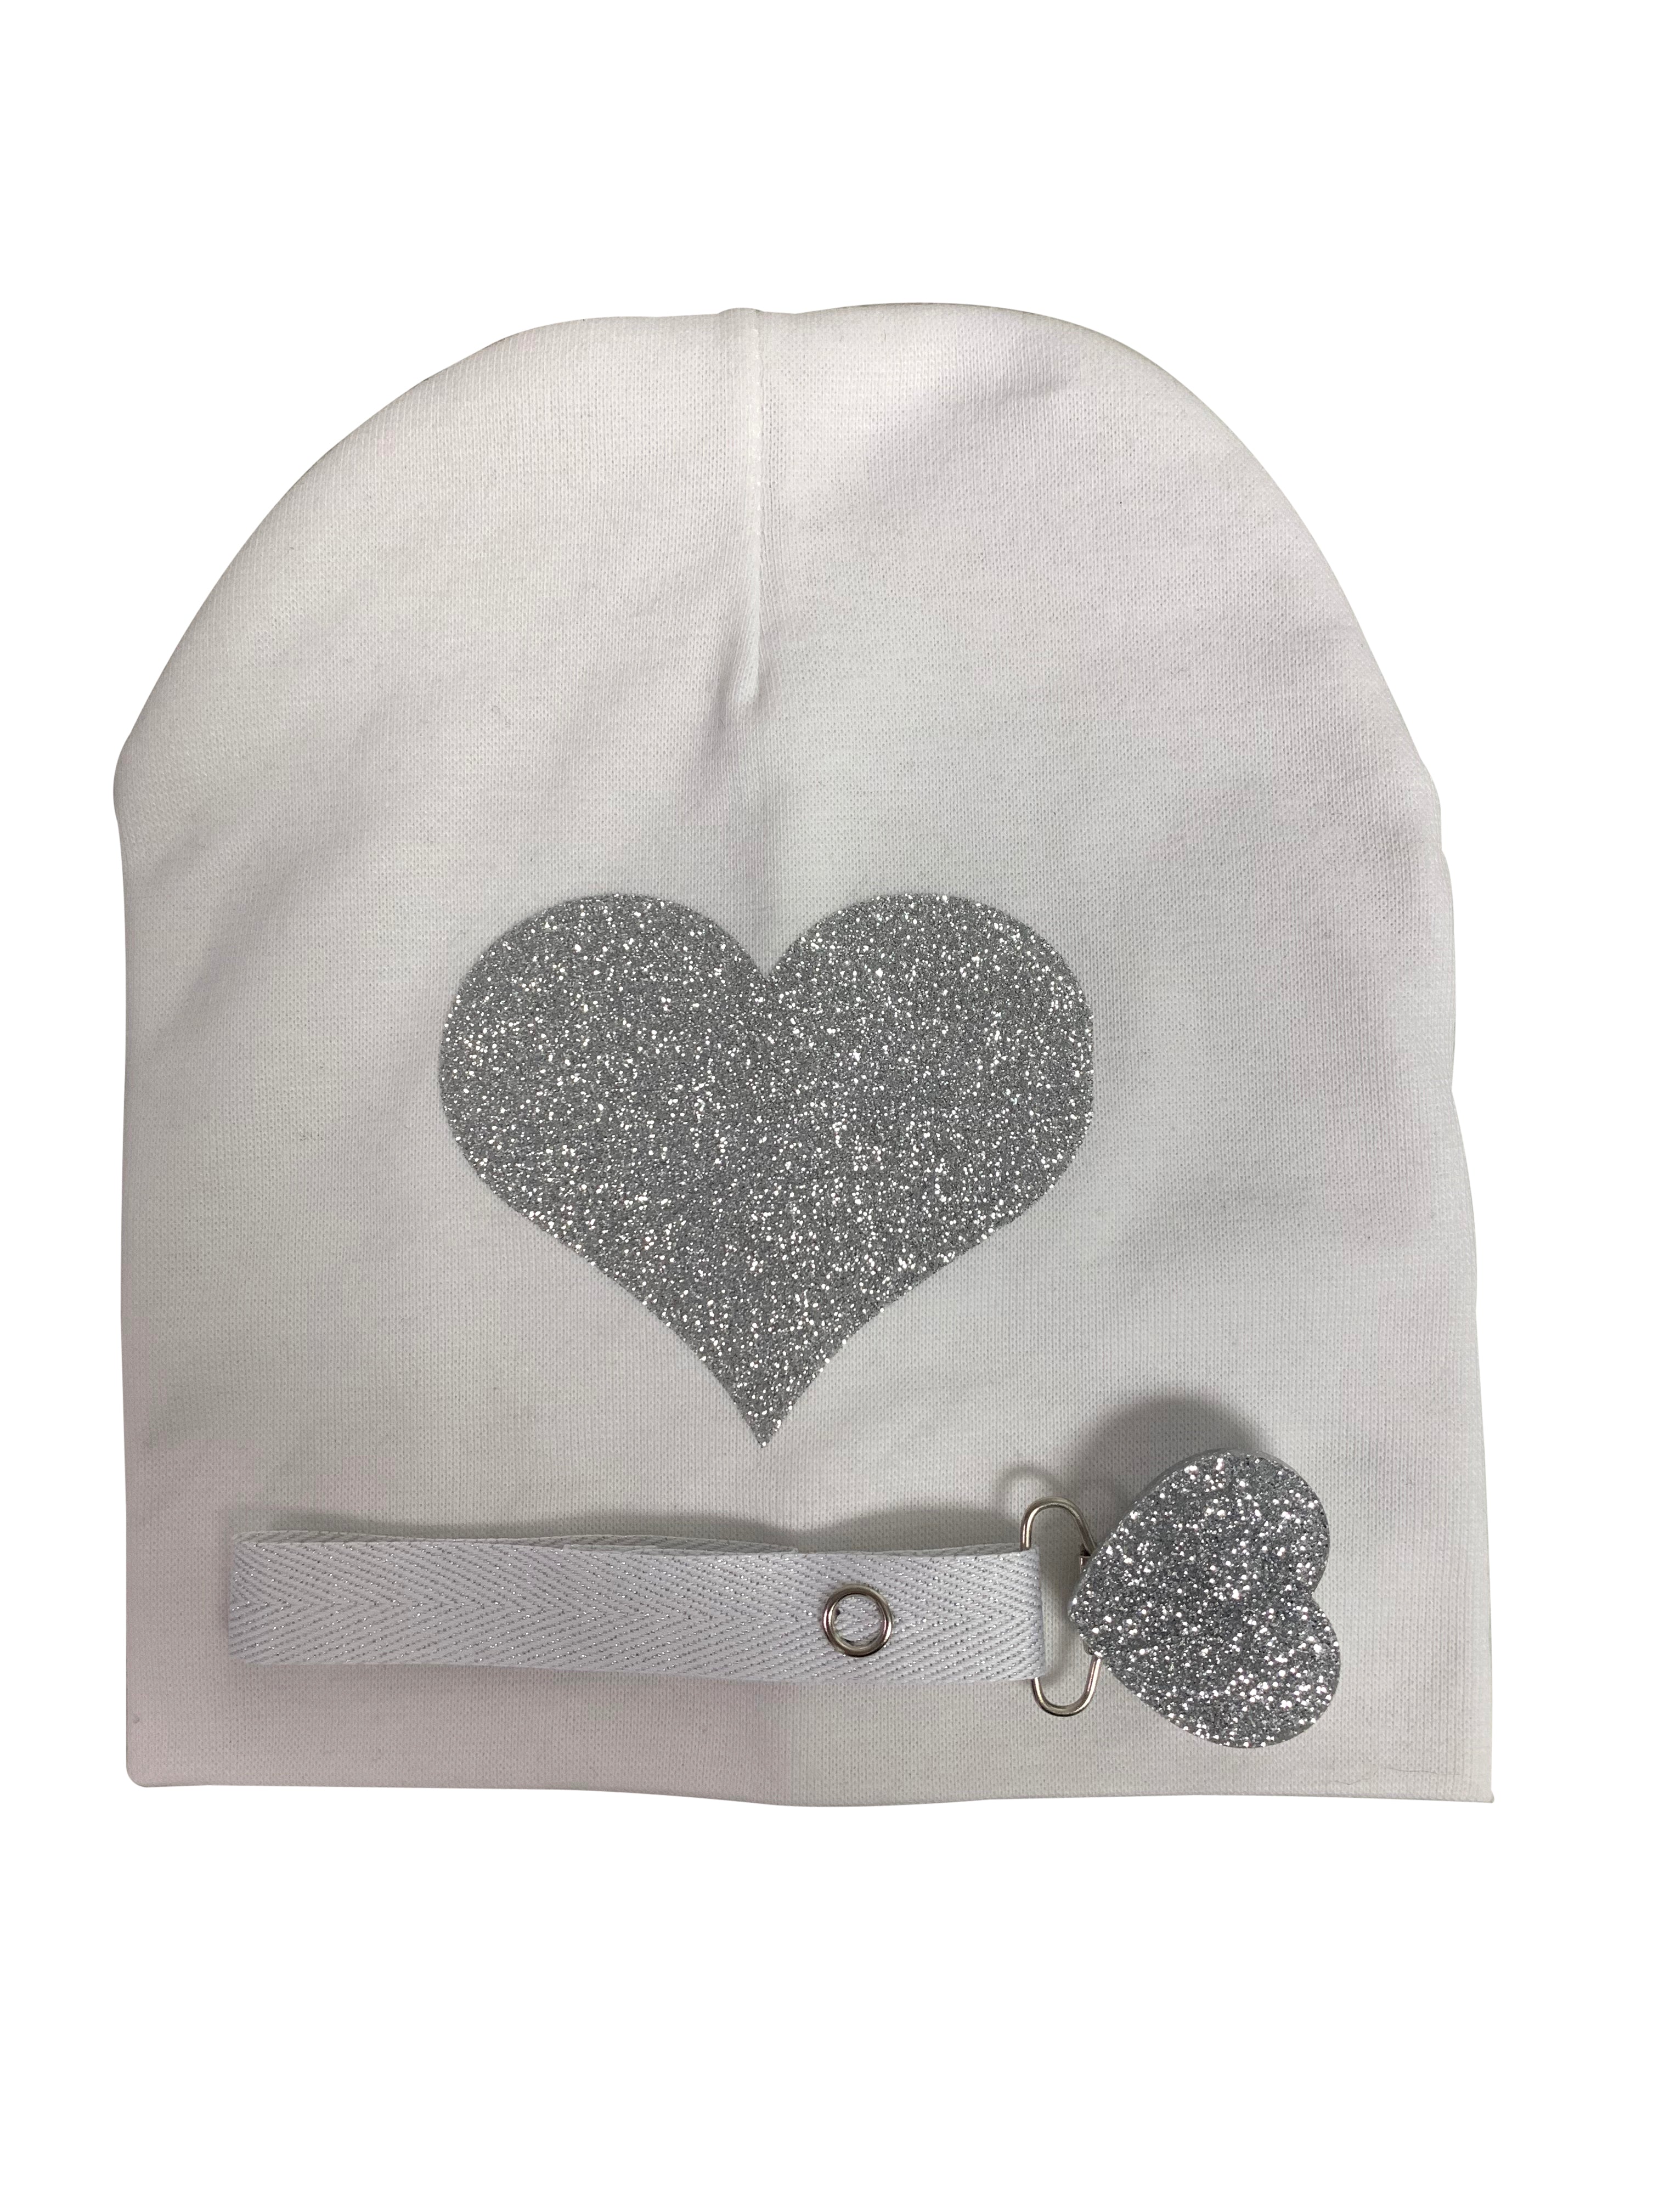 White with silver heart sparkle bib, hat, pacifier clip DELUXE GIFT SET